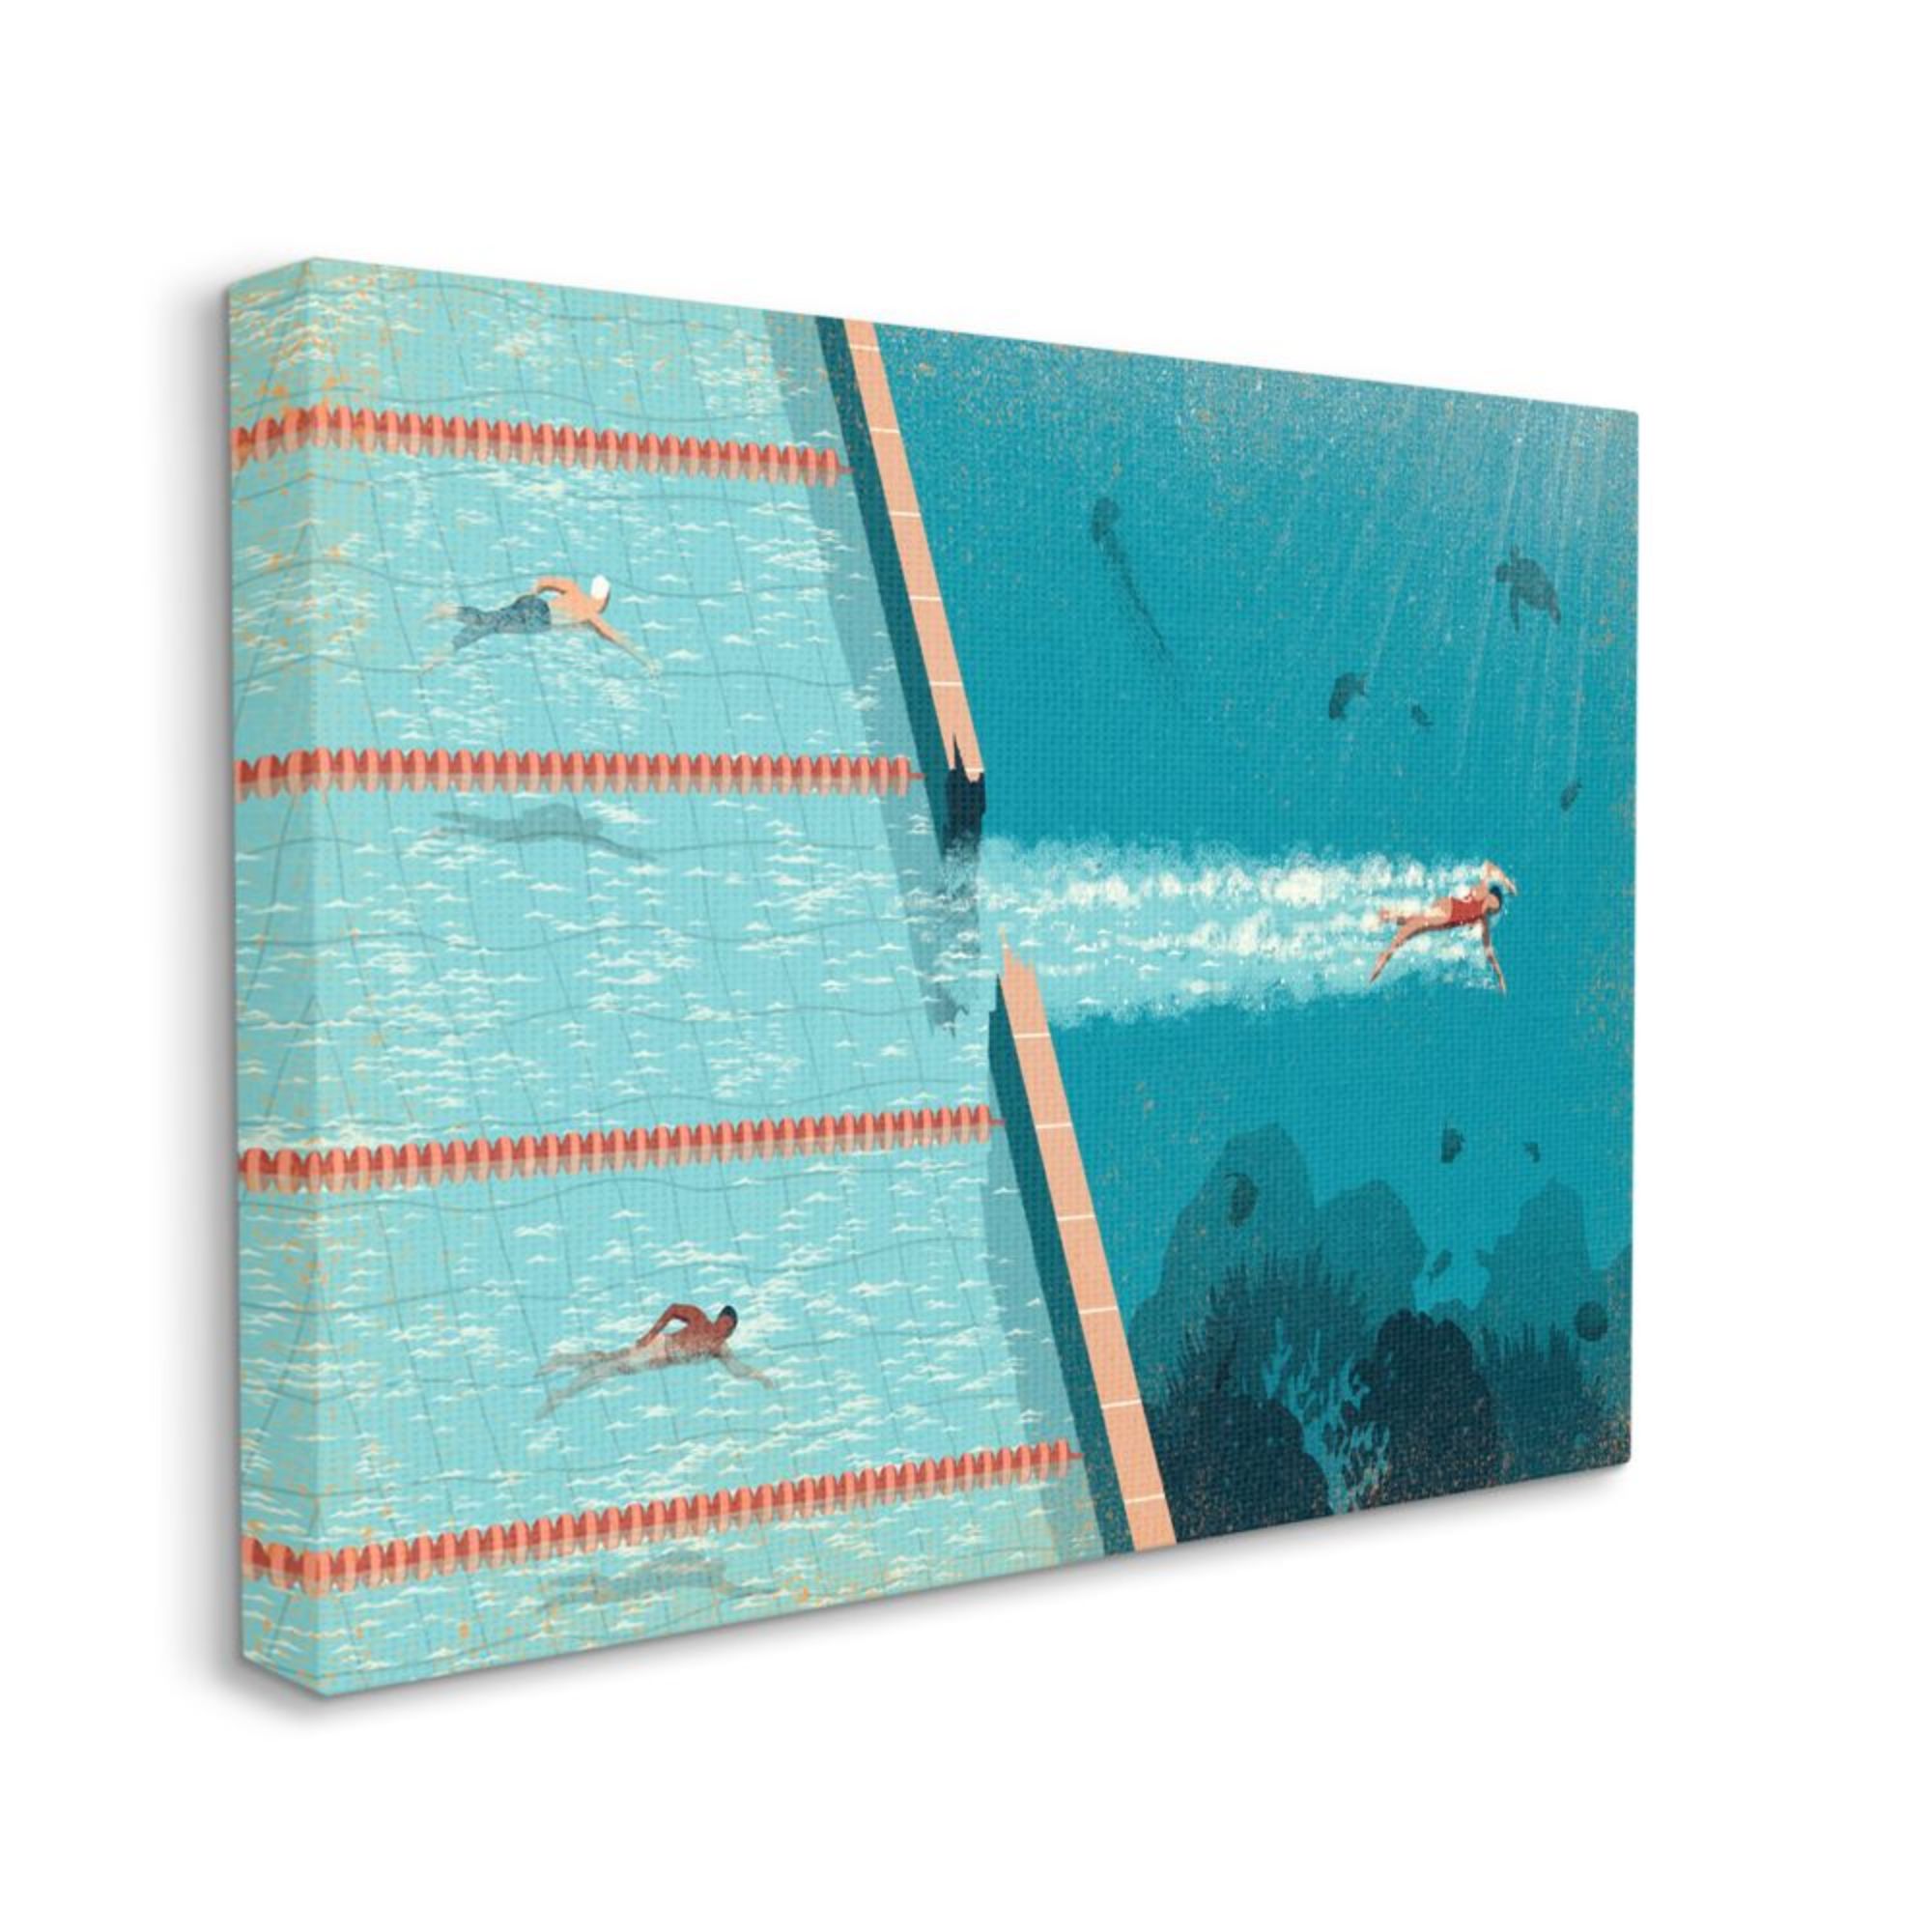 Come Swim with Me Giclée Print on Canvas or Paper